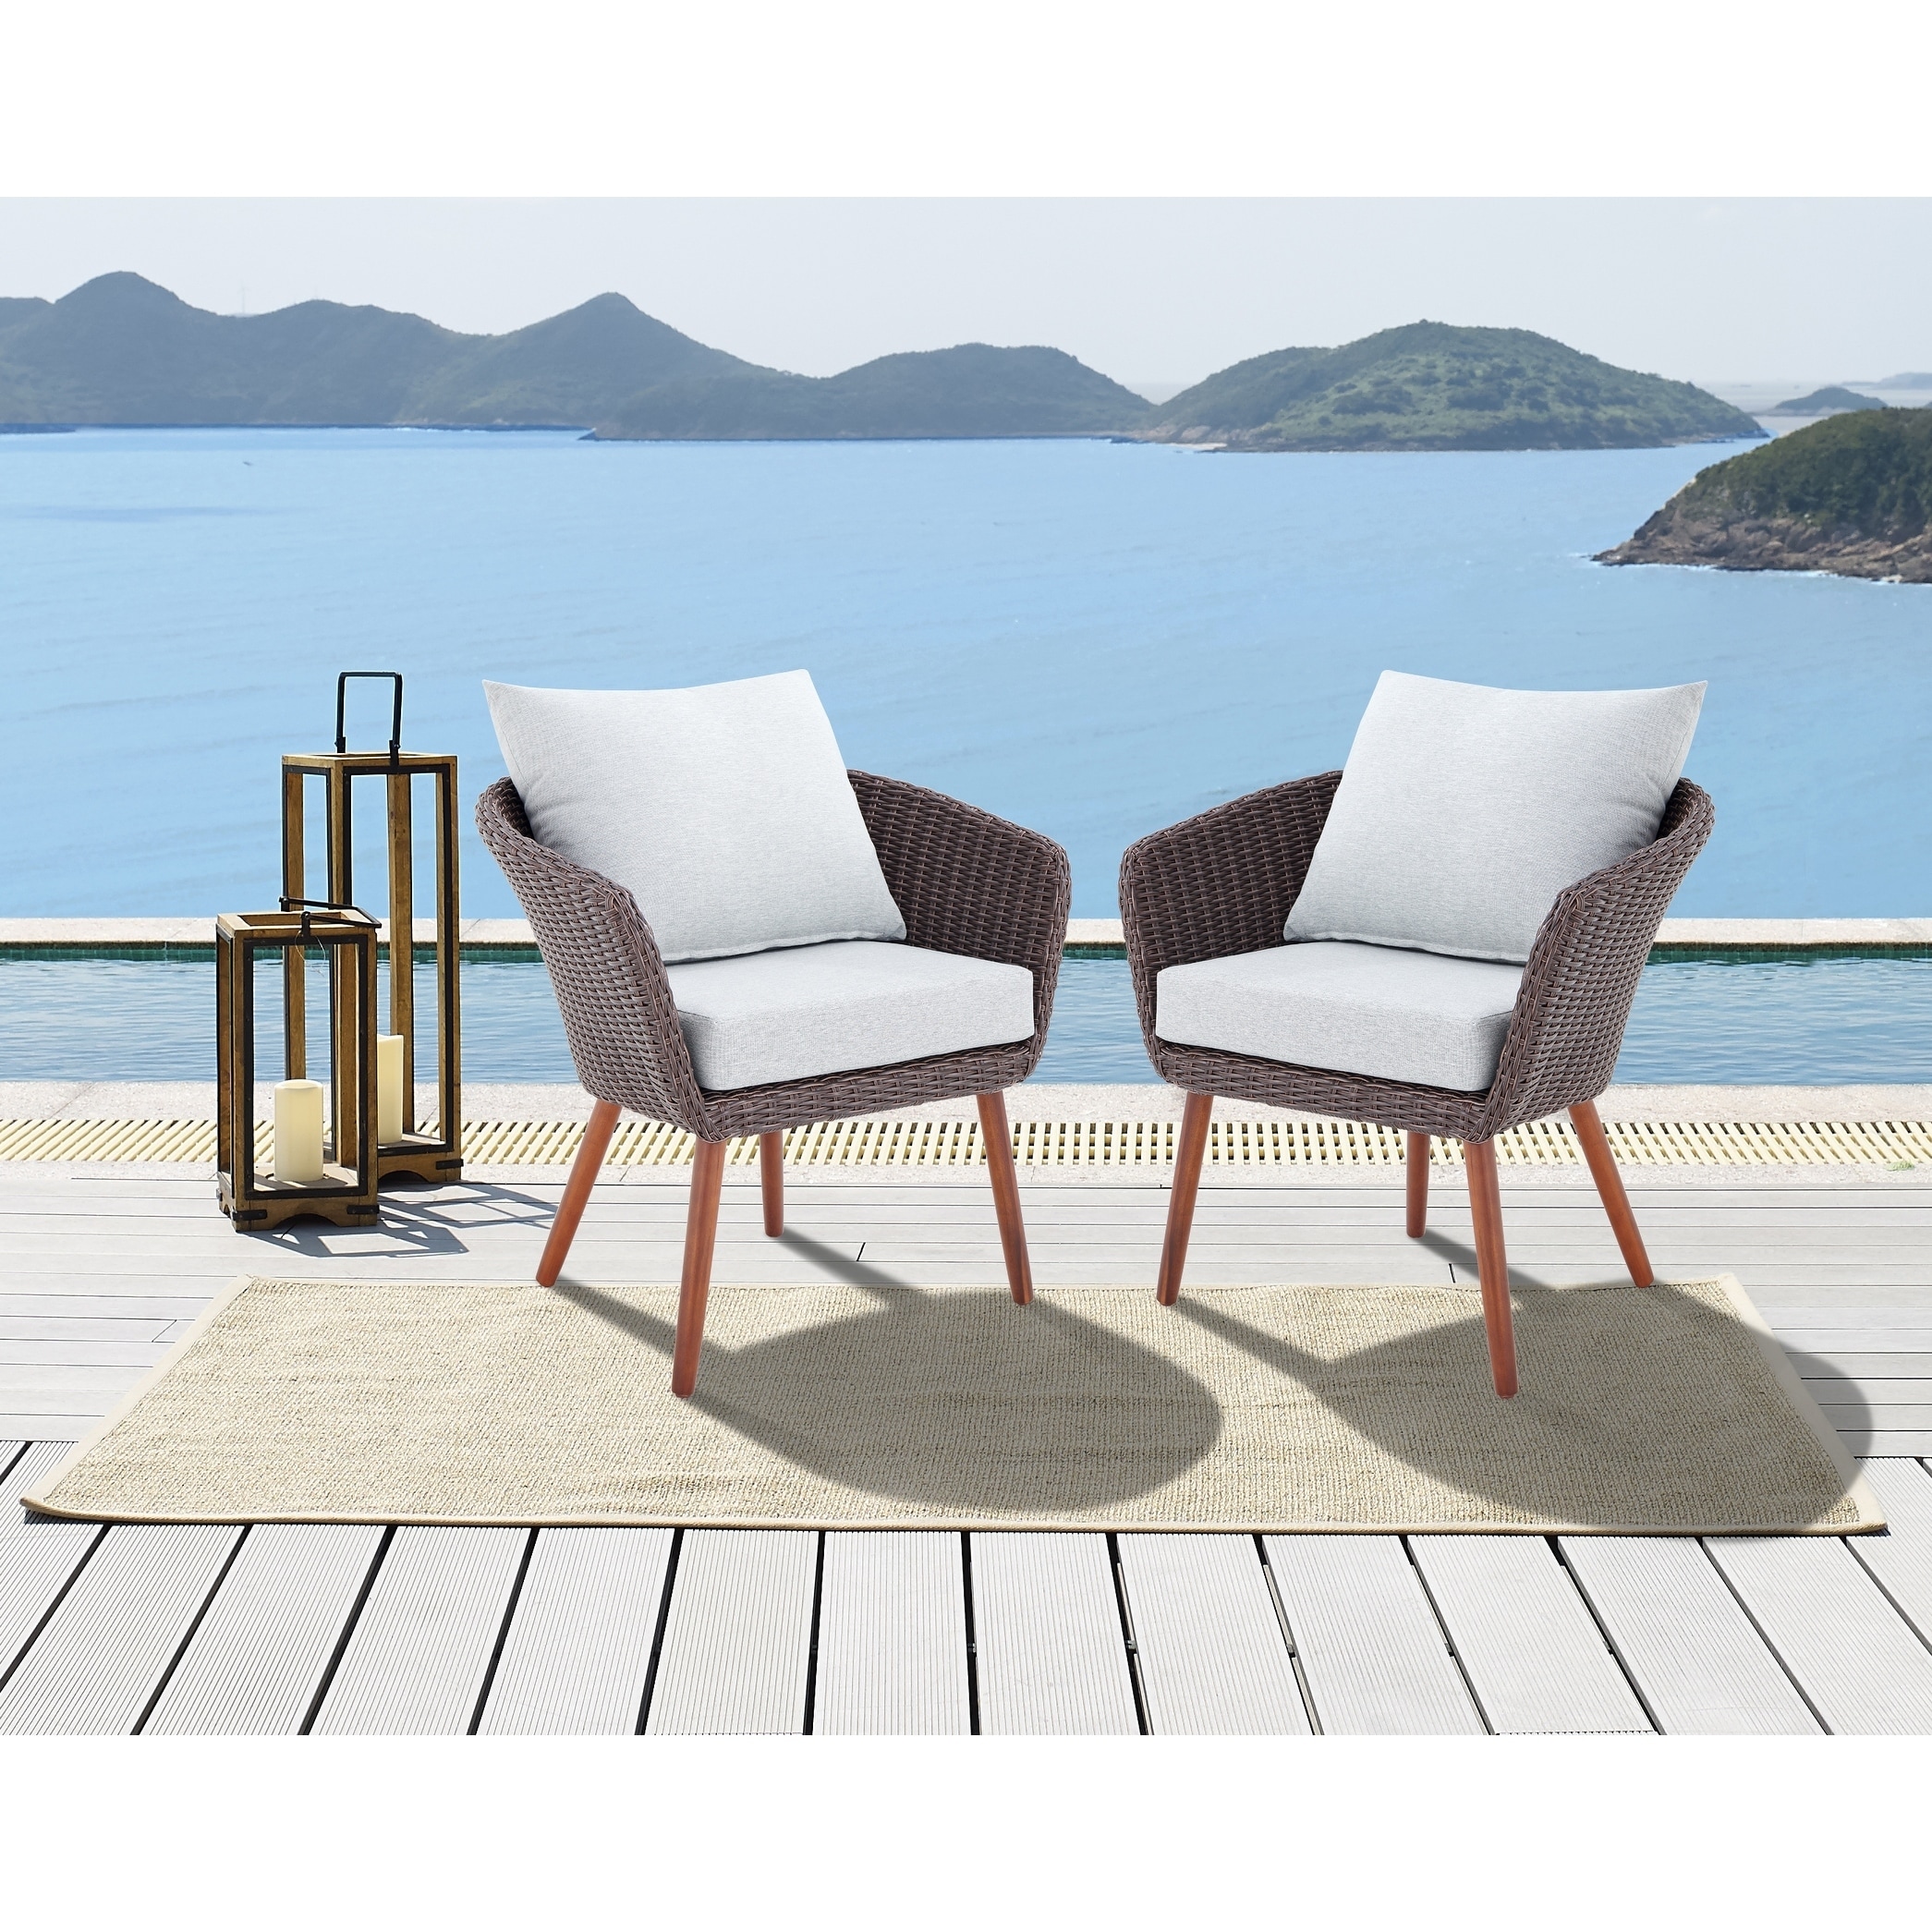 Caluma Brown Wicker Chairs With Cushions Set Of 2 By Havenside Home On Sale Overstock 29422166